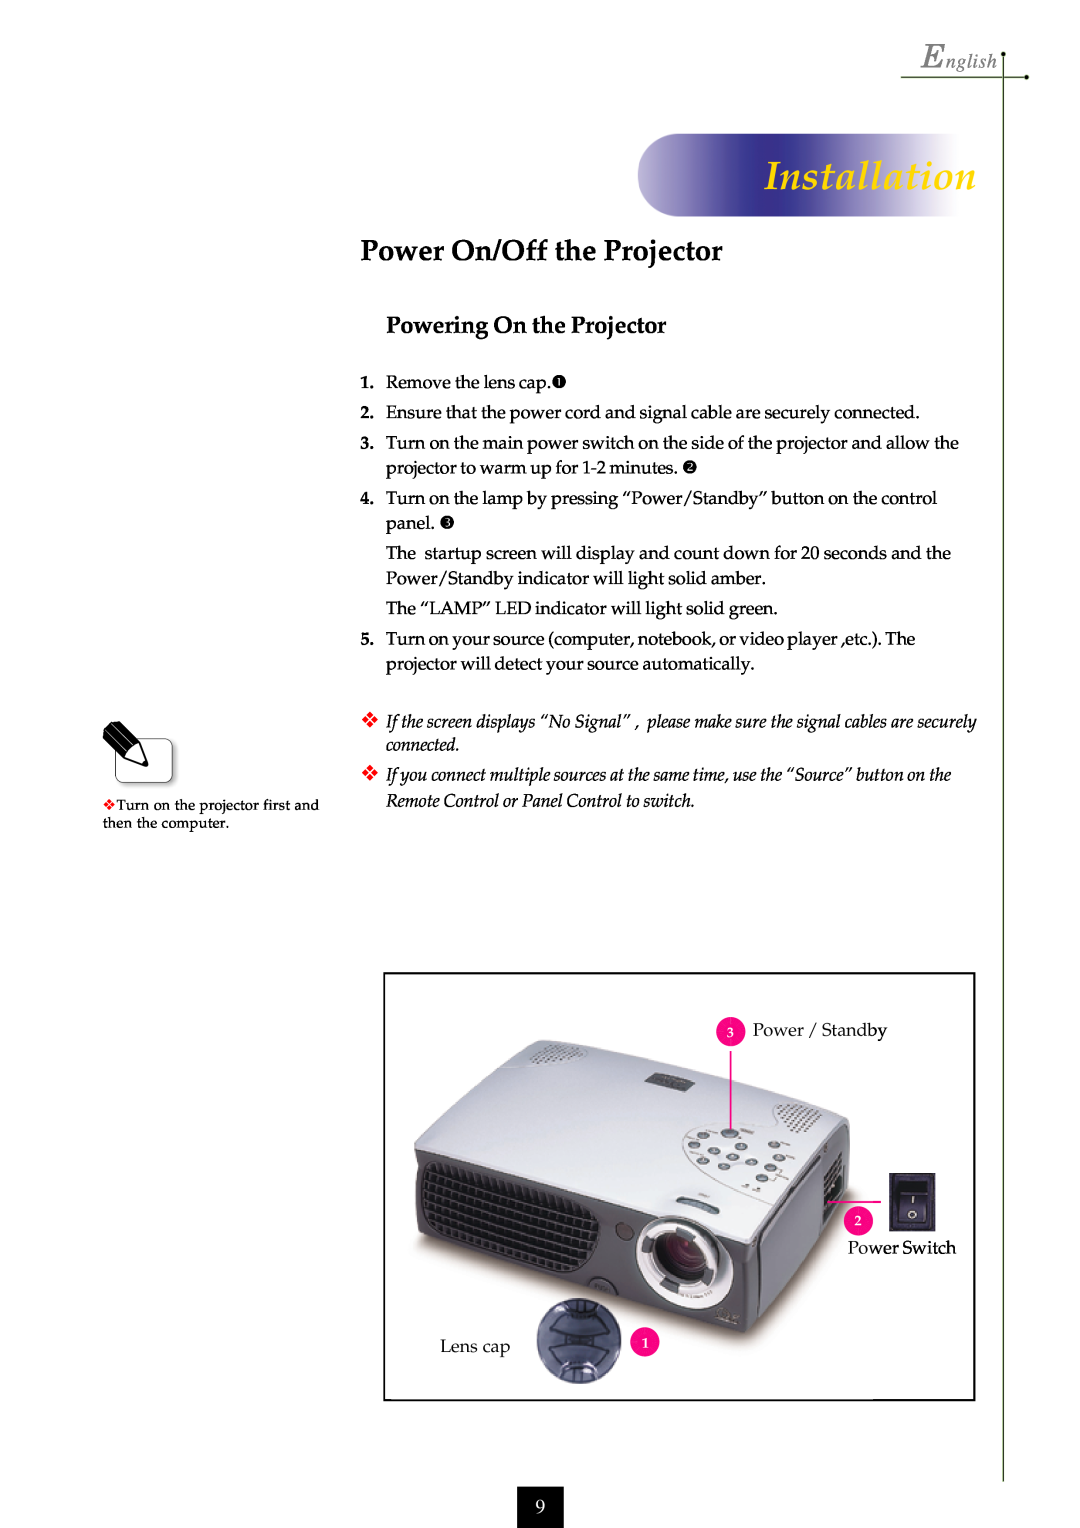 Optoma Technology EP750 Power On/Off the Projector, Powering On the Projector, Installation, English, Lens cap 